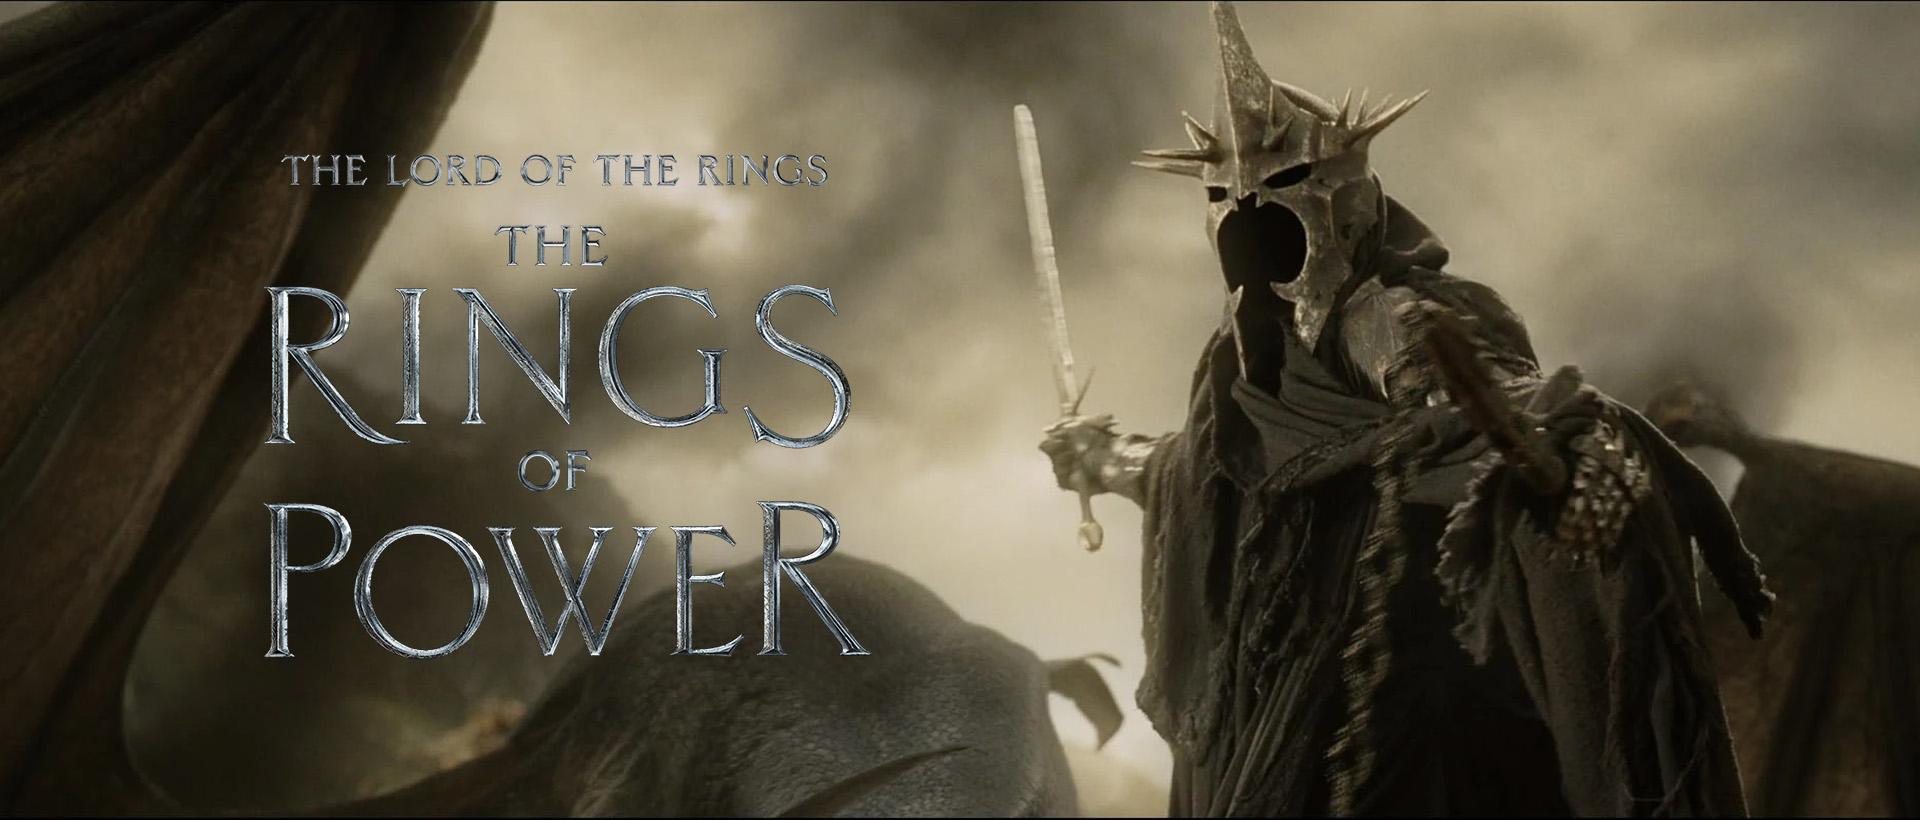 trusted two first-time showrunners with 'The Rings of Power